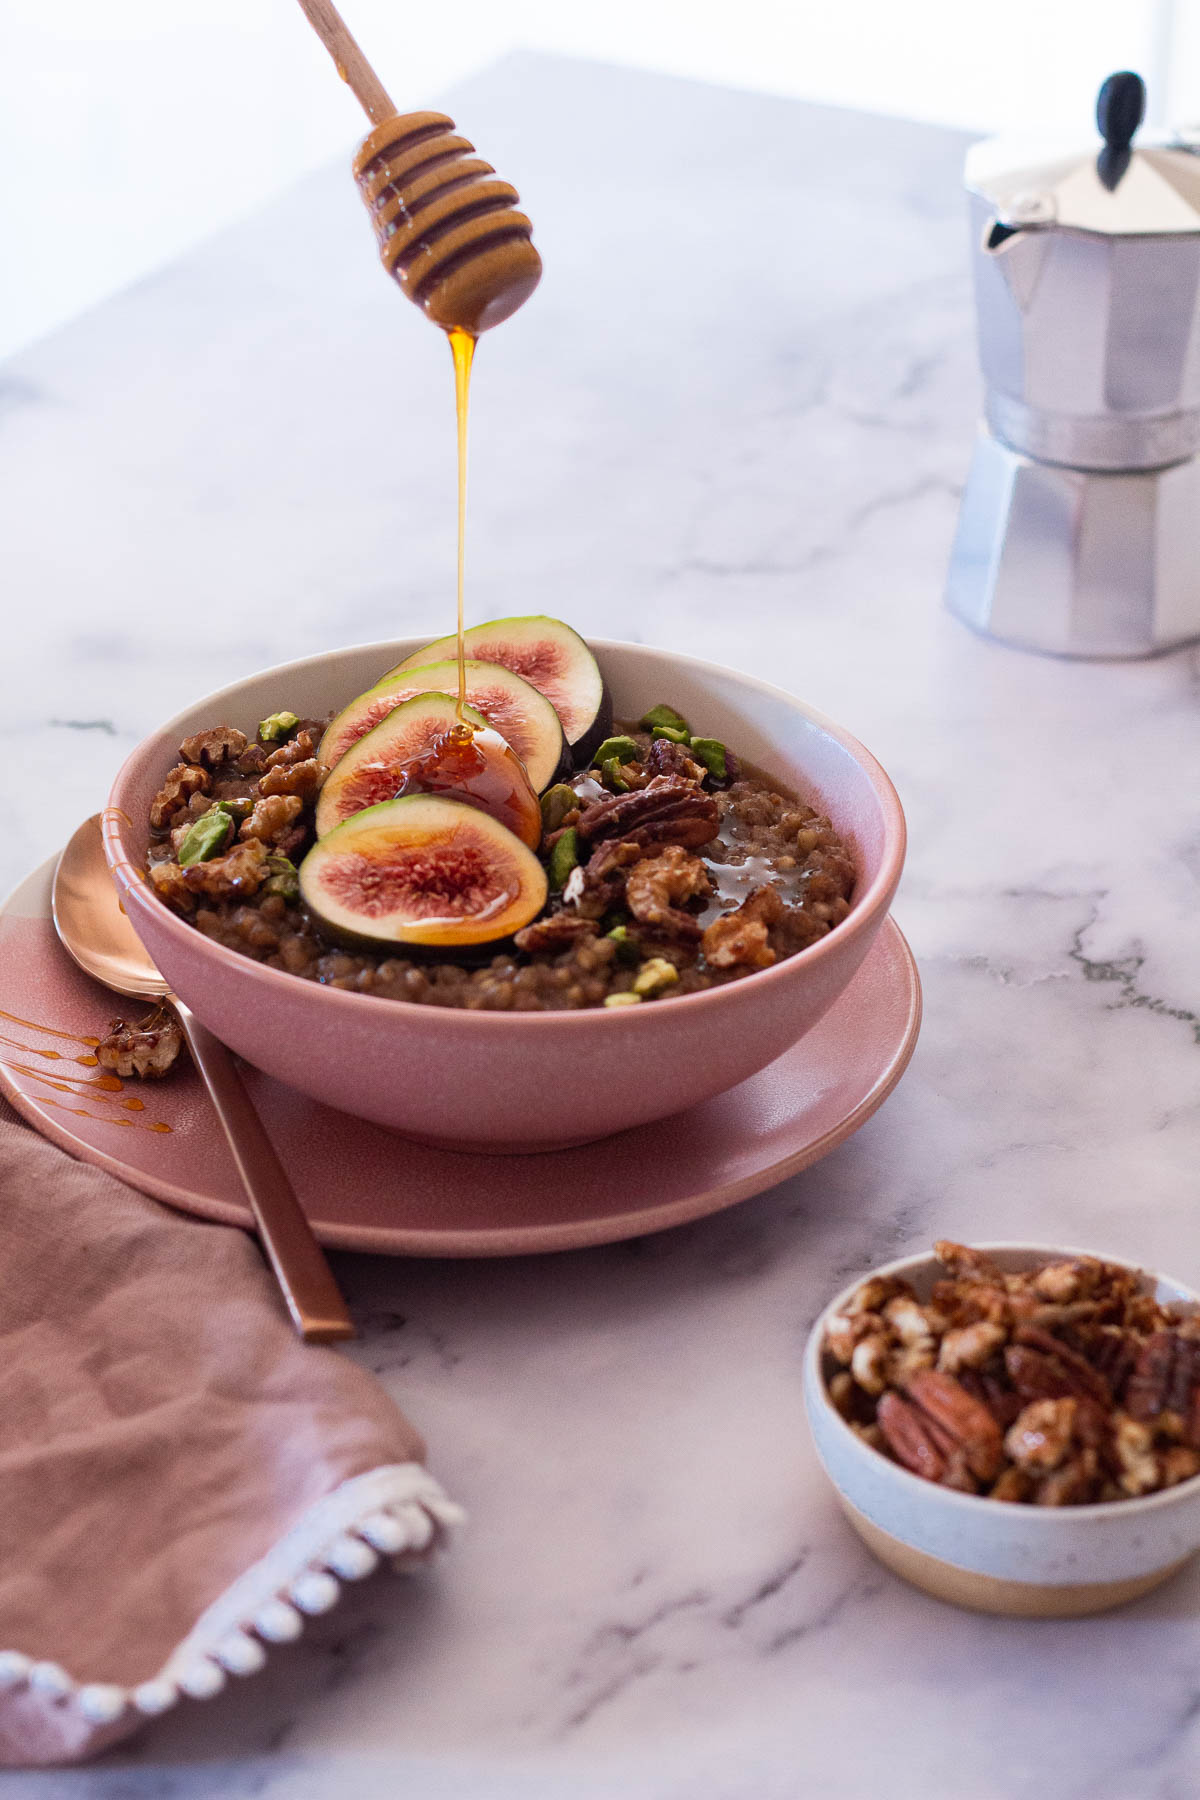 Drizzling honey over a bowl of Baklava Buckwheat Porridge served with figs and candied nuts